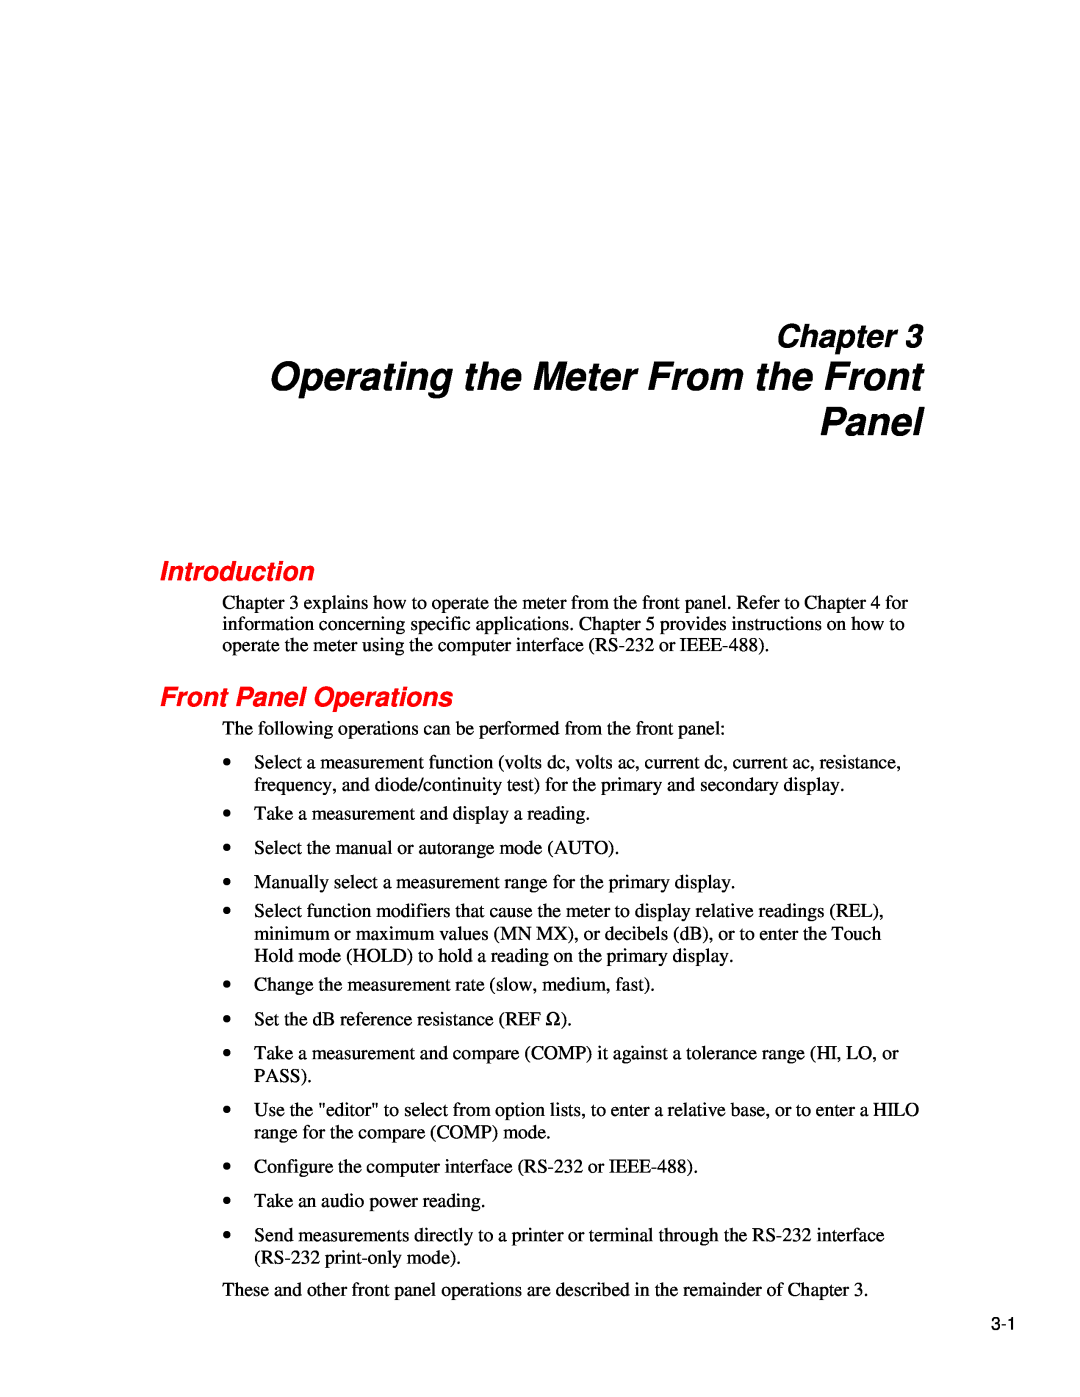 Fluke 45 user manual Operating the Meter From the Front Panel, Front Panel Operations, Chapter, Introduction 